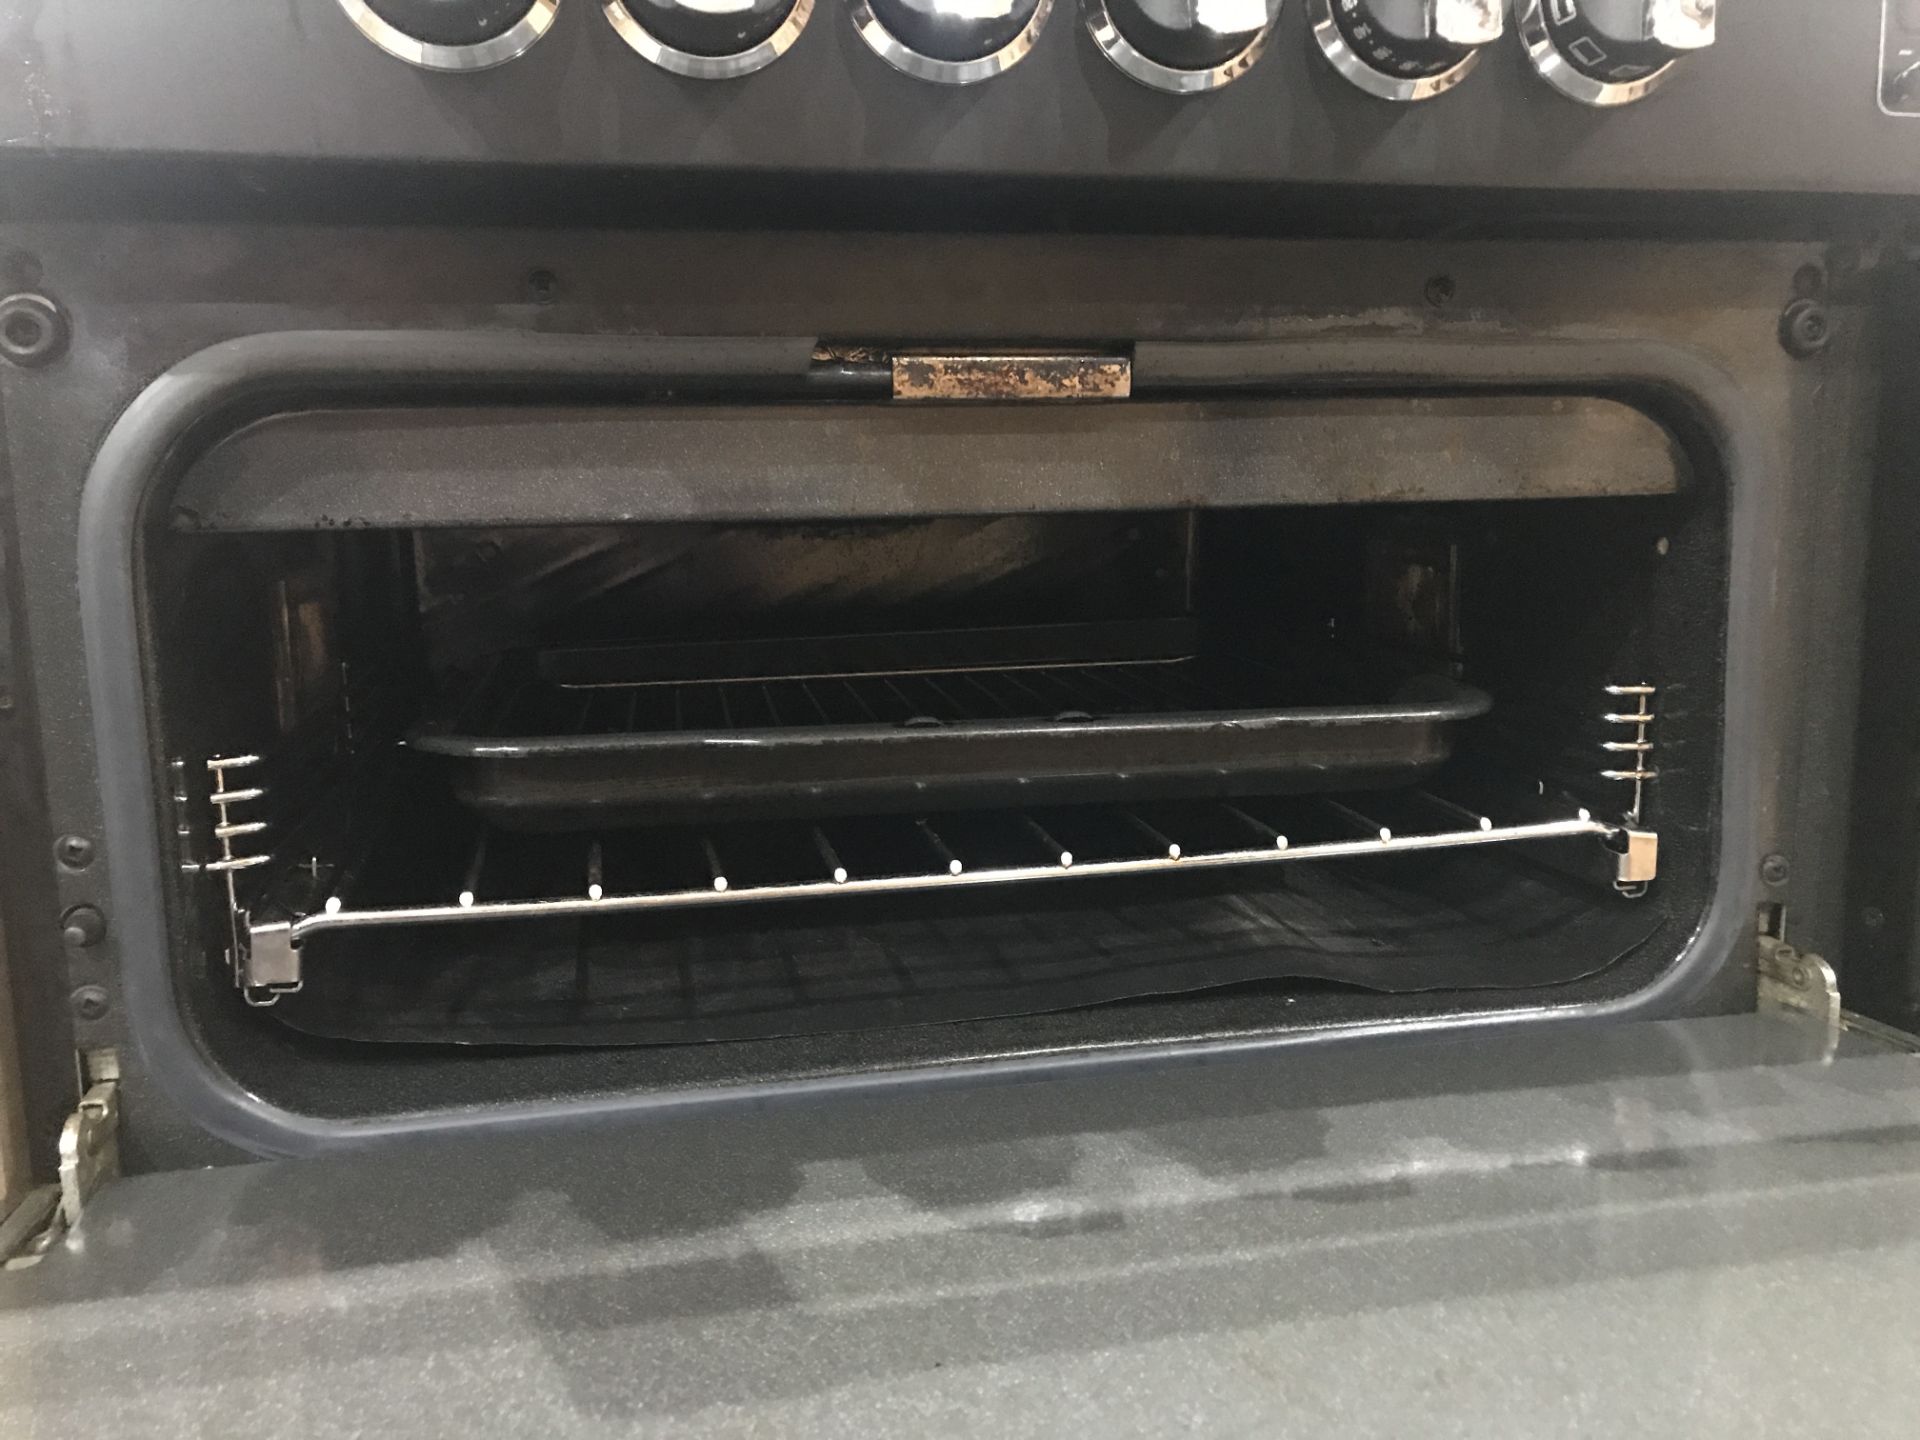 1 x Stoves Richmond 1100DF Dual Fuel Range Cooker With Matching Extractor Hood - Black Finish With 4 - Image 16 of 18